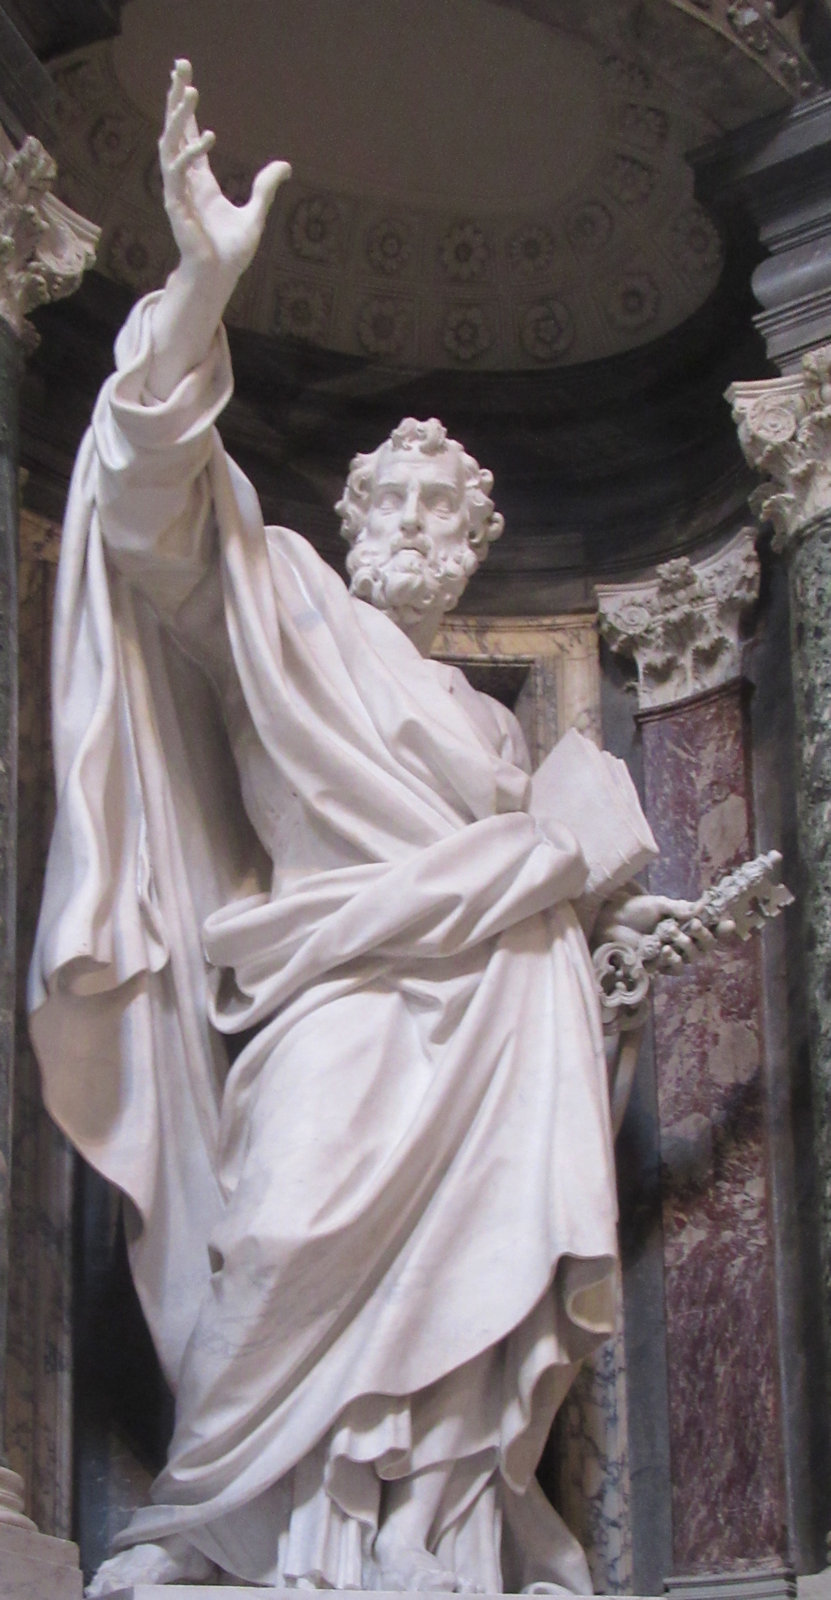 Pierre-Étienne Monnot: Statue, 1705 - 1711, in der Basilika San Giovanni in Laterano in Rom